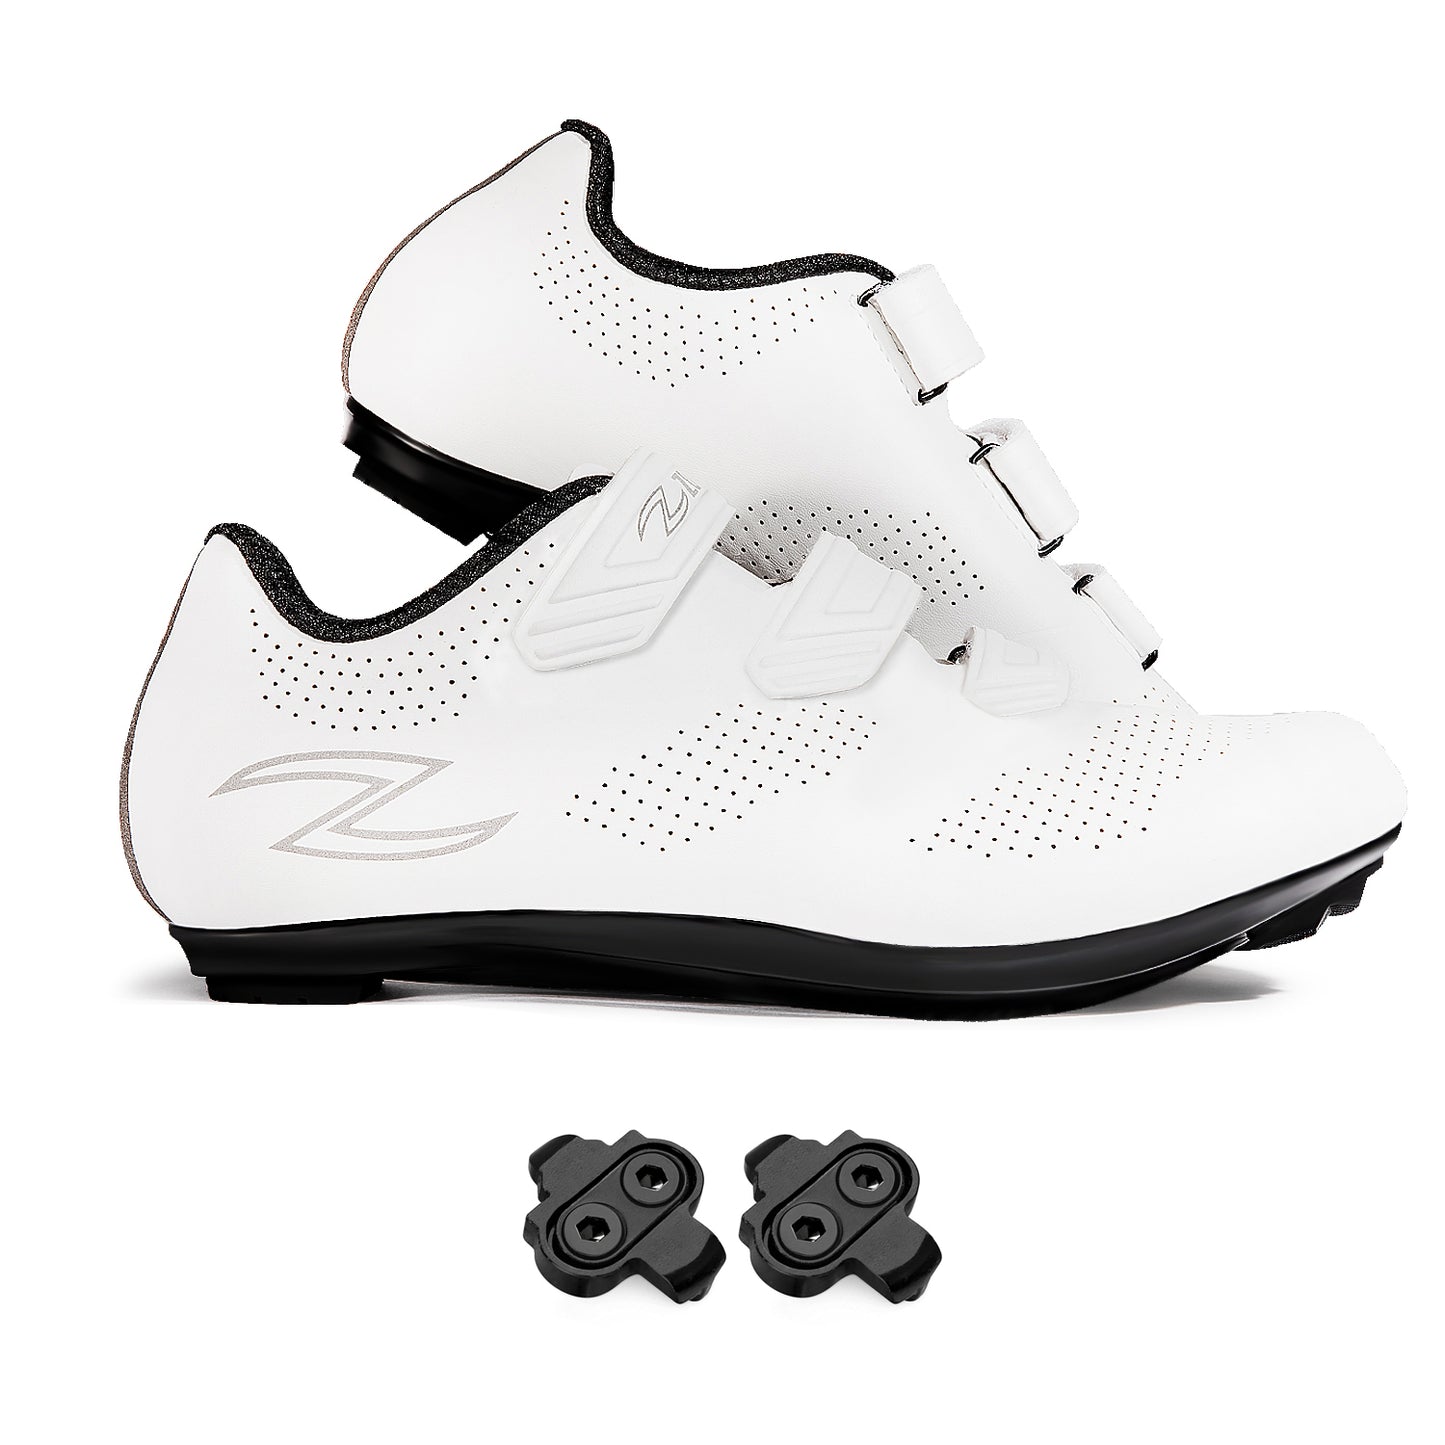 Zol Fondo Road Cycling Shoes with Mtb Spd Cleats - Zol Cycling